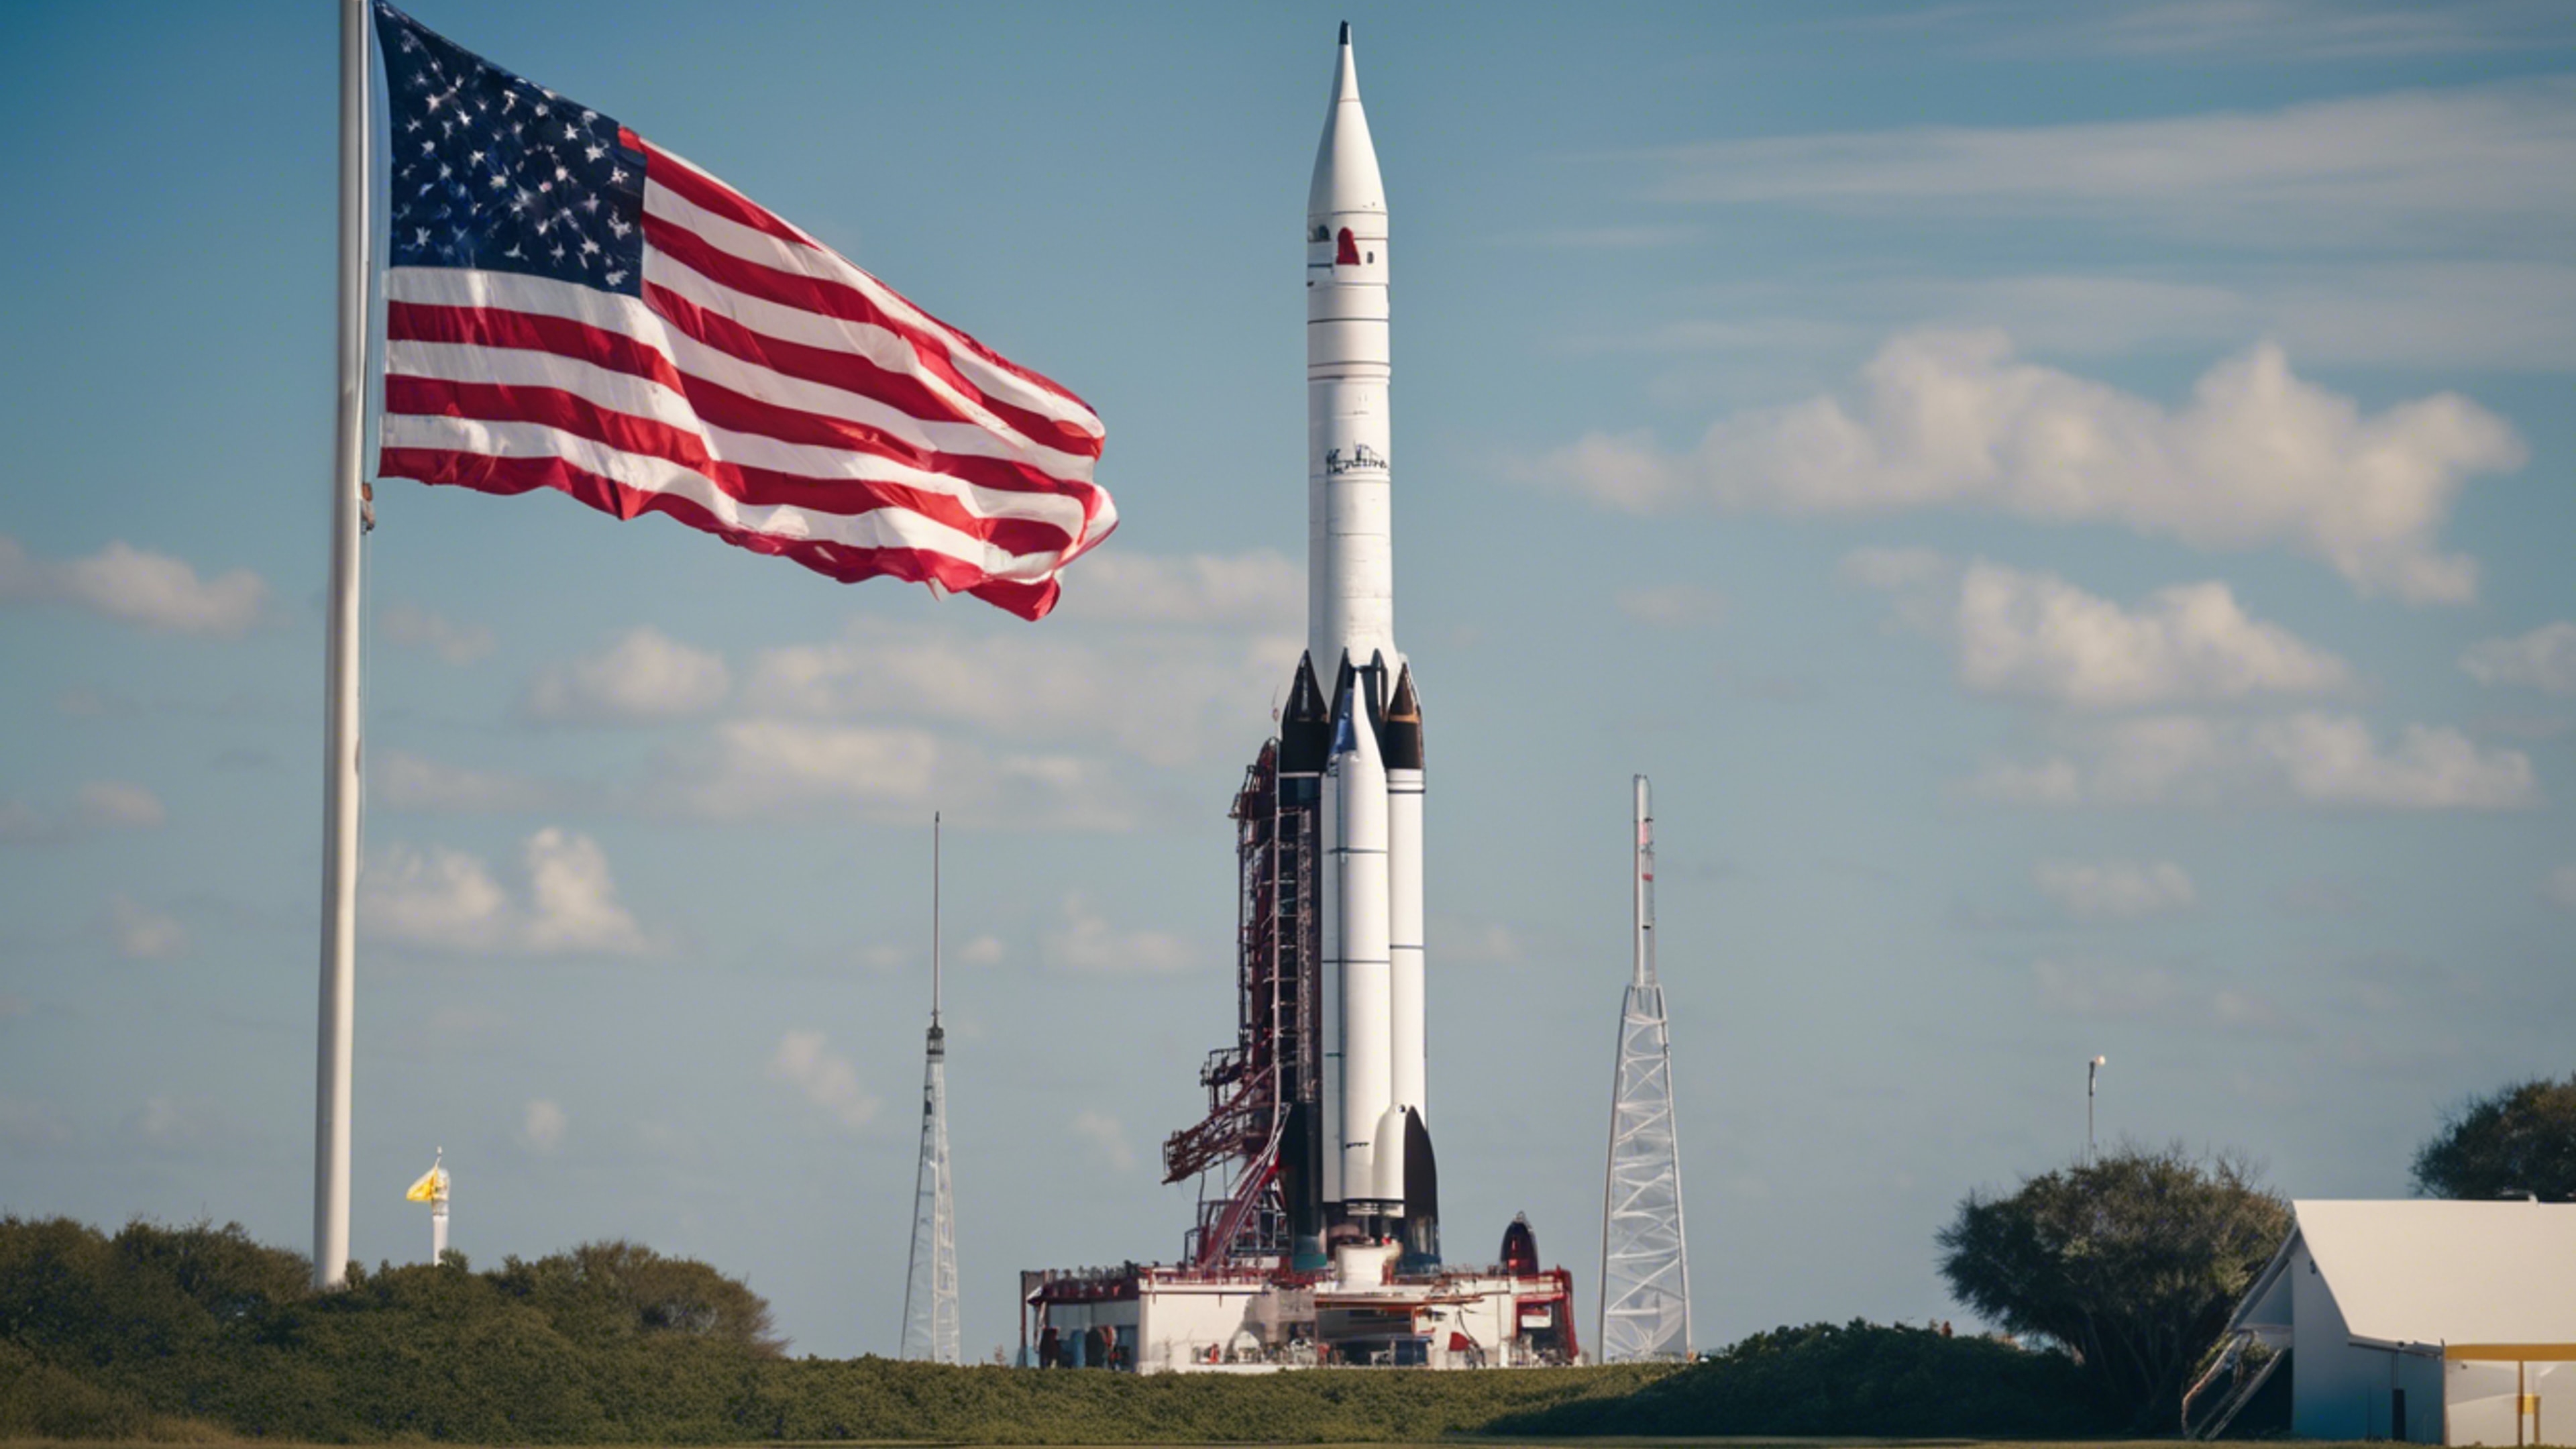 A historic rocket display at Cape Canaveral, with a clear blue sky and the American flag waving in the background.壁紙[7e3199d5ab33424fb953]